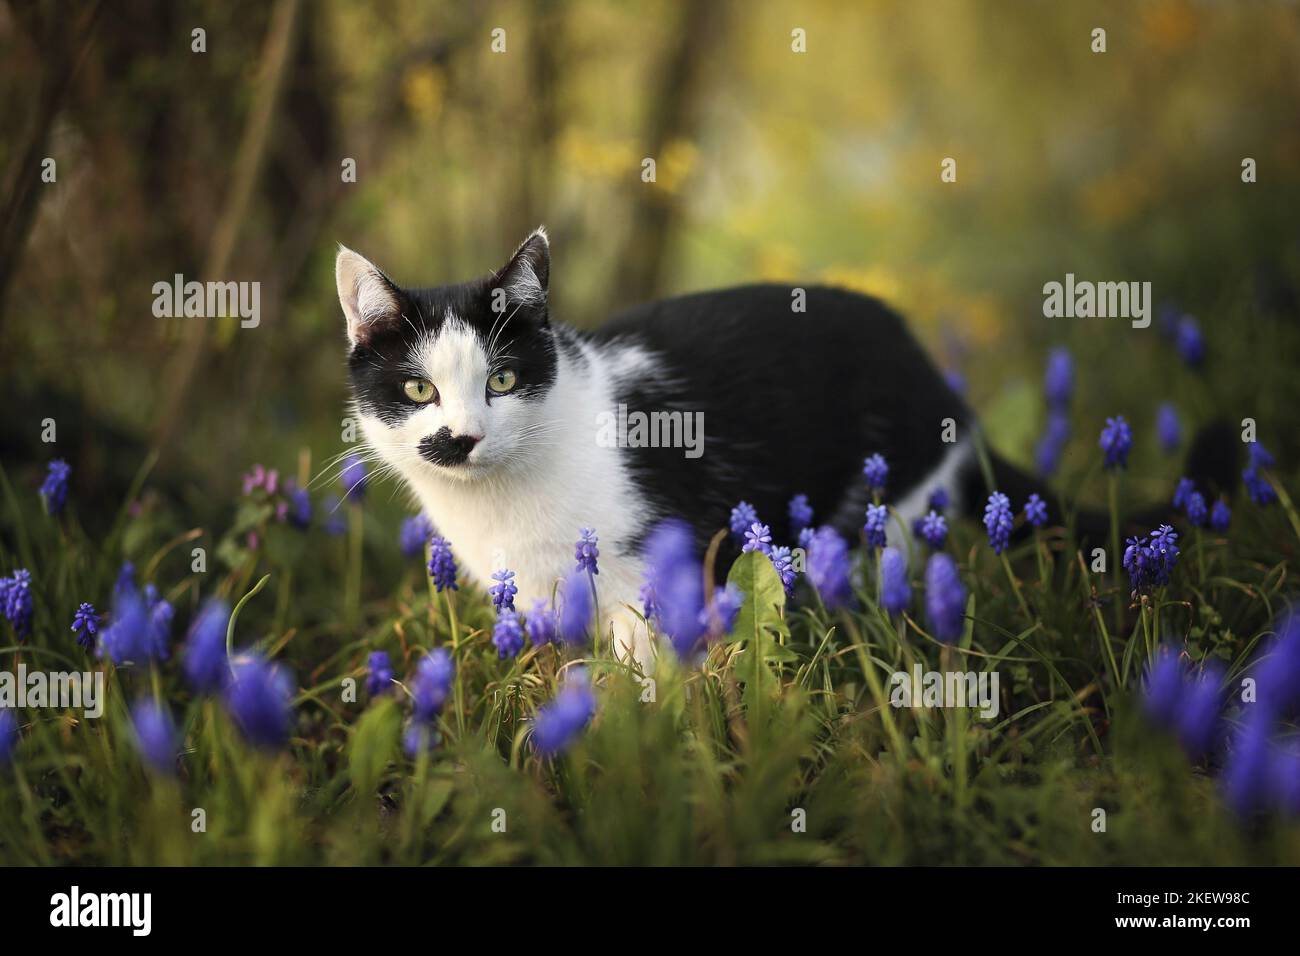 Domestic Cat behind flowers Stock Photo